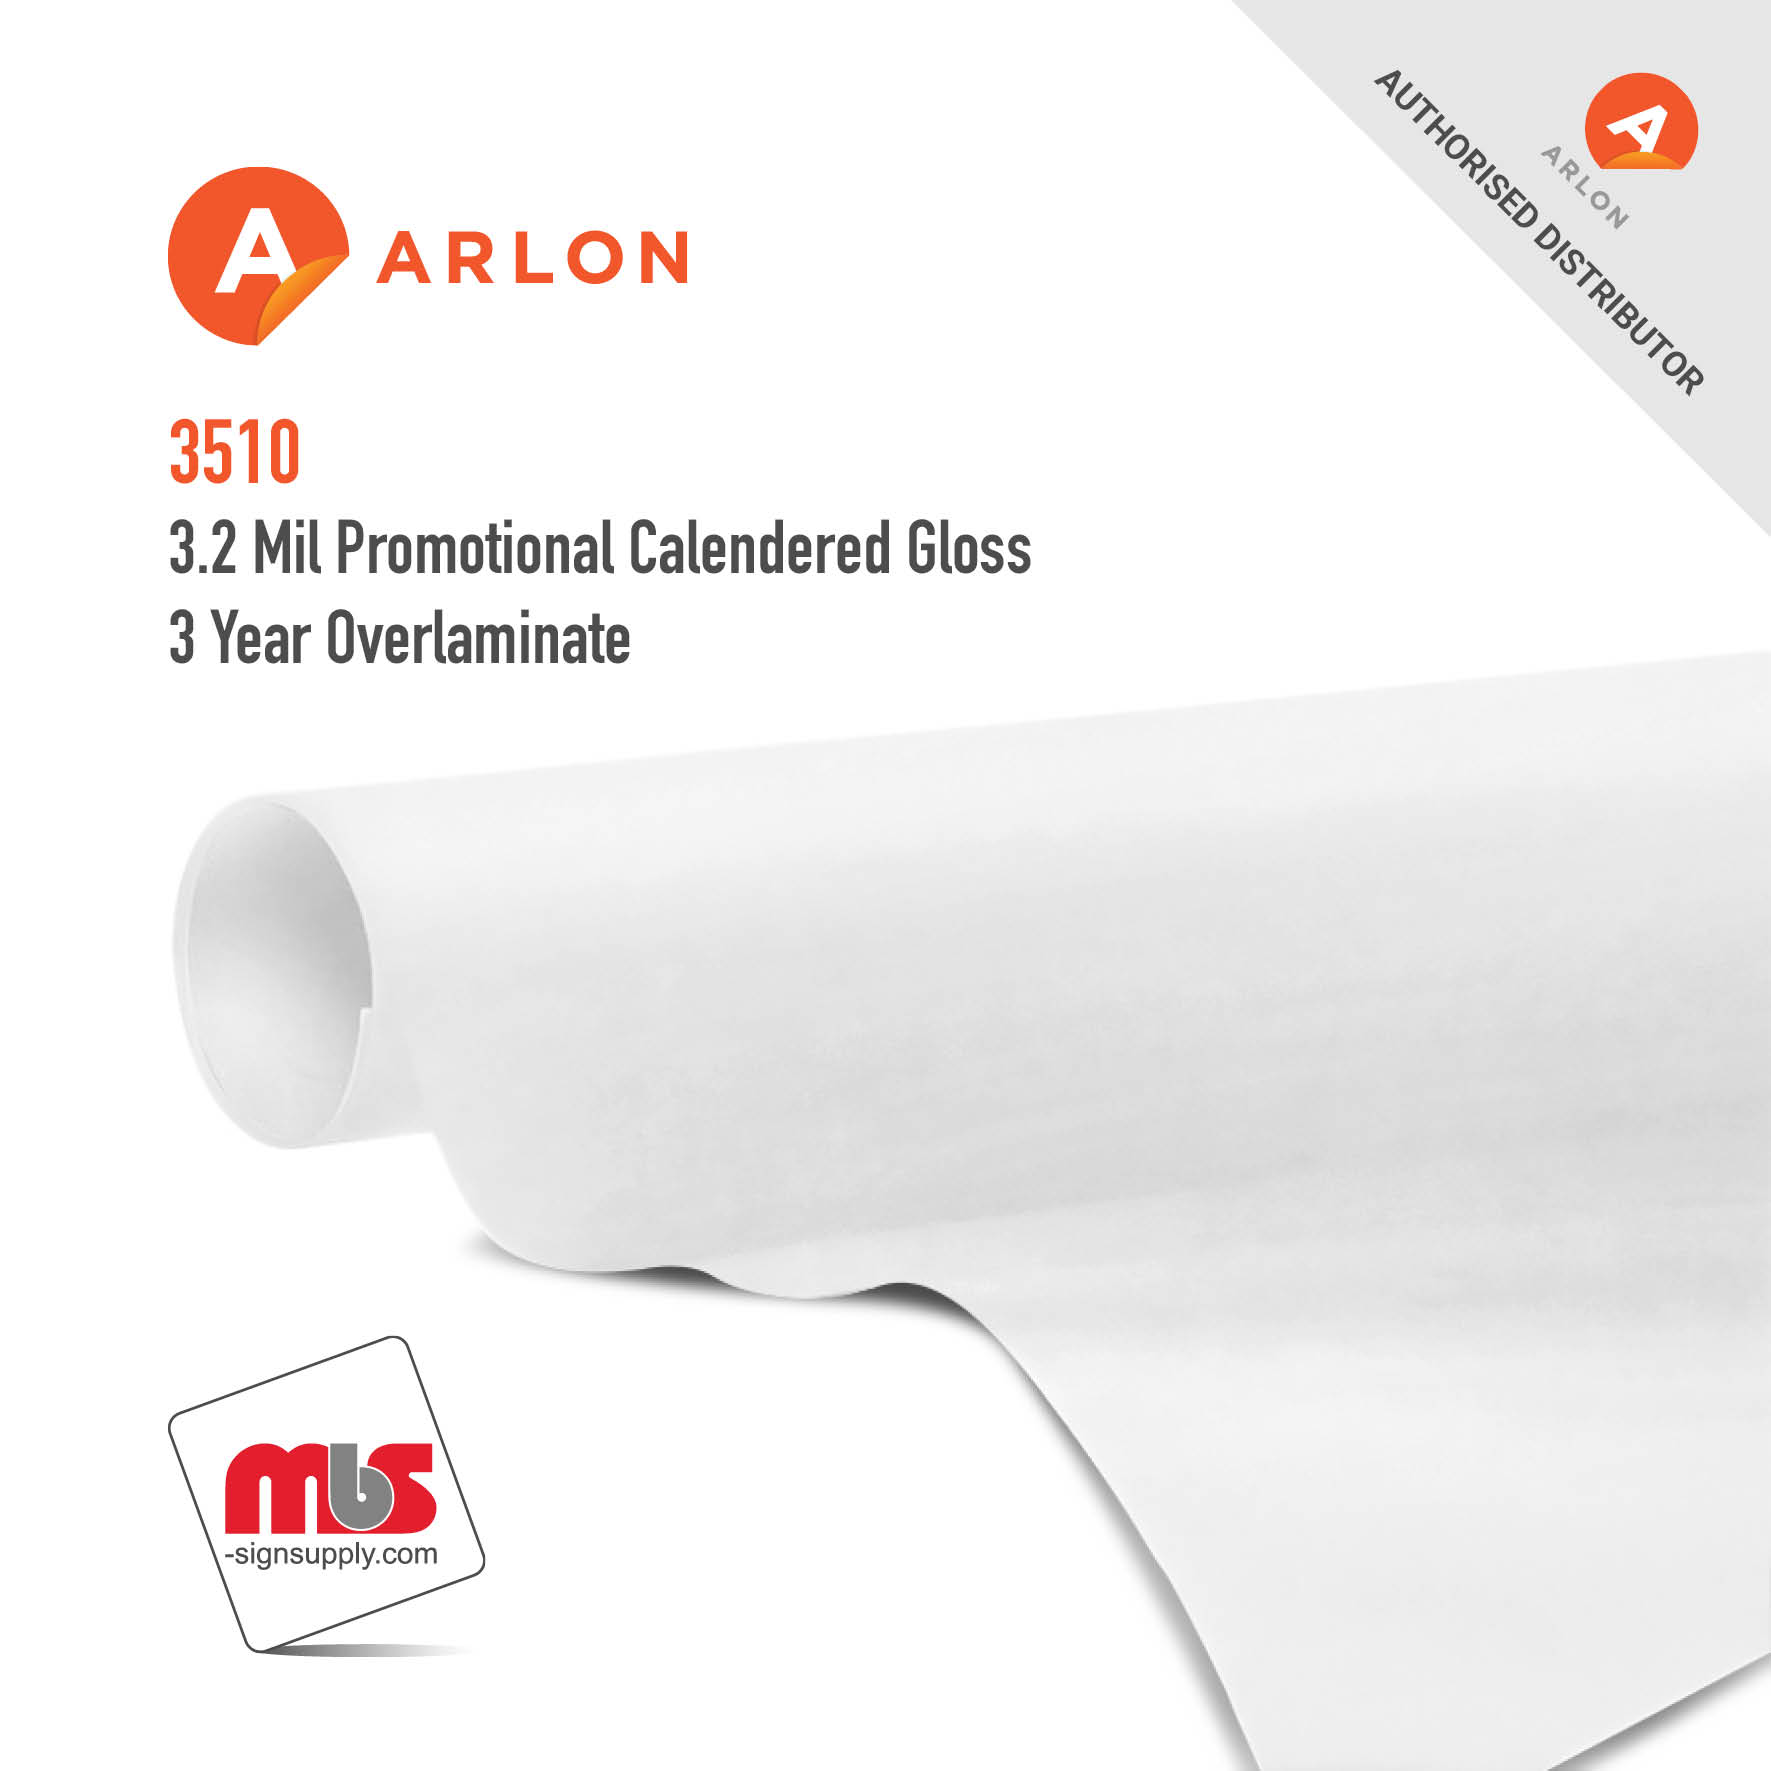 54'' x 50 Yard Roll - Arlon 3510 3.2 Mil Promotional Calendered Matte 3 Year Overlaminate